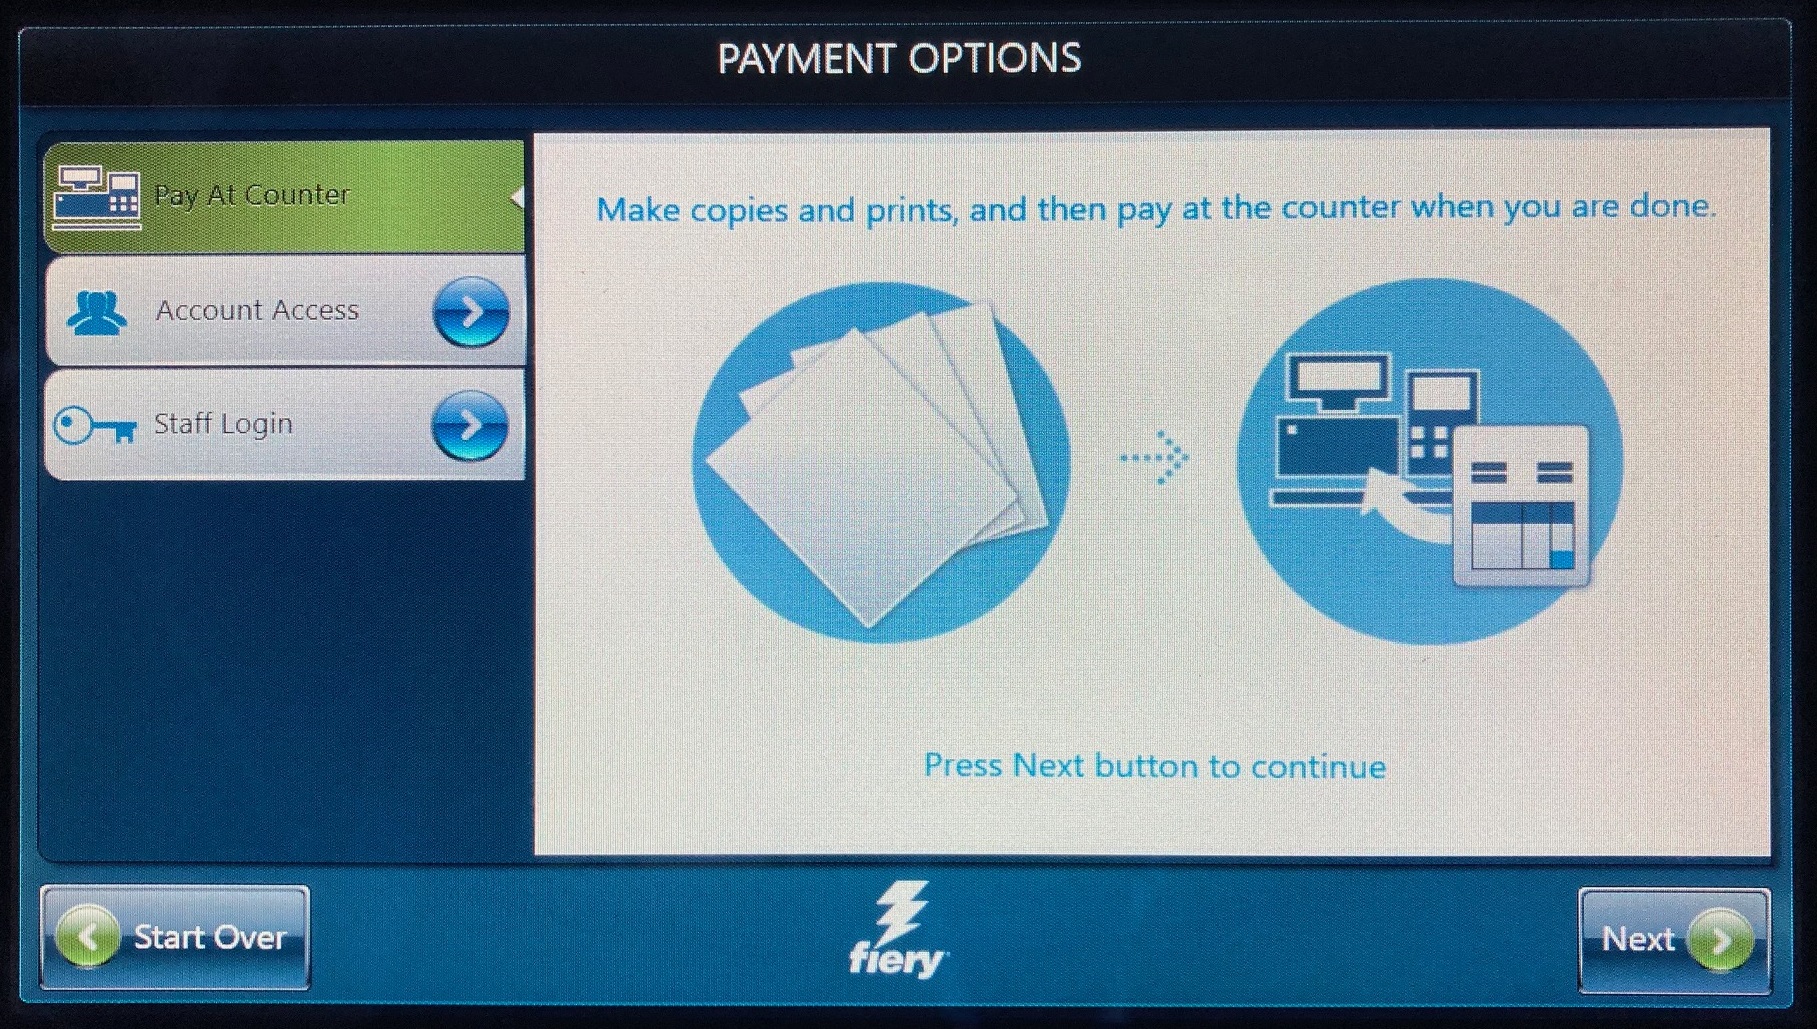 The payment options screen with Pat At  Counter at top. 